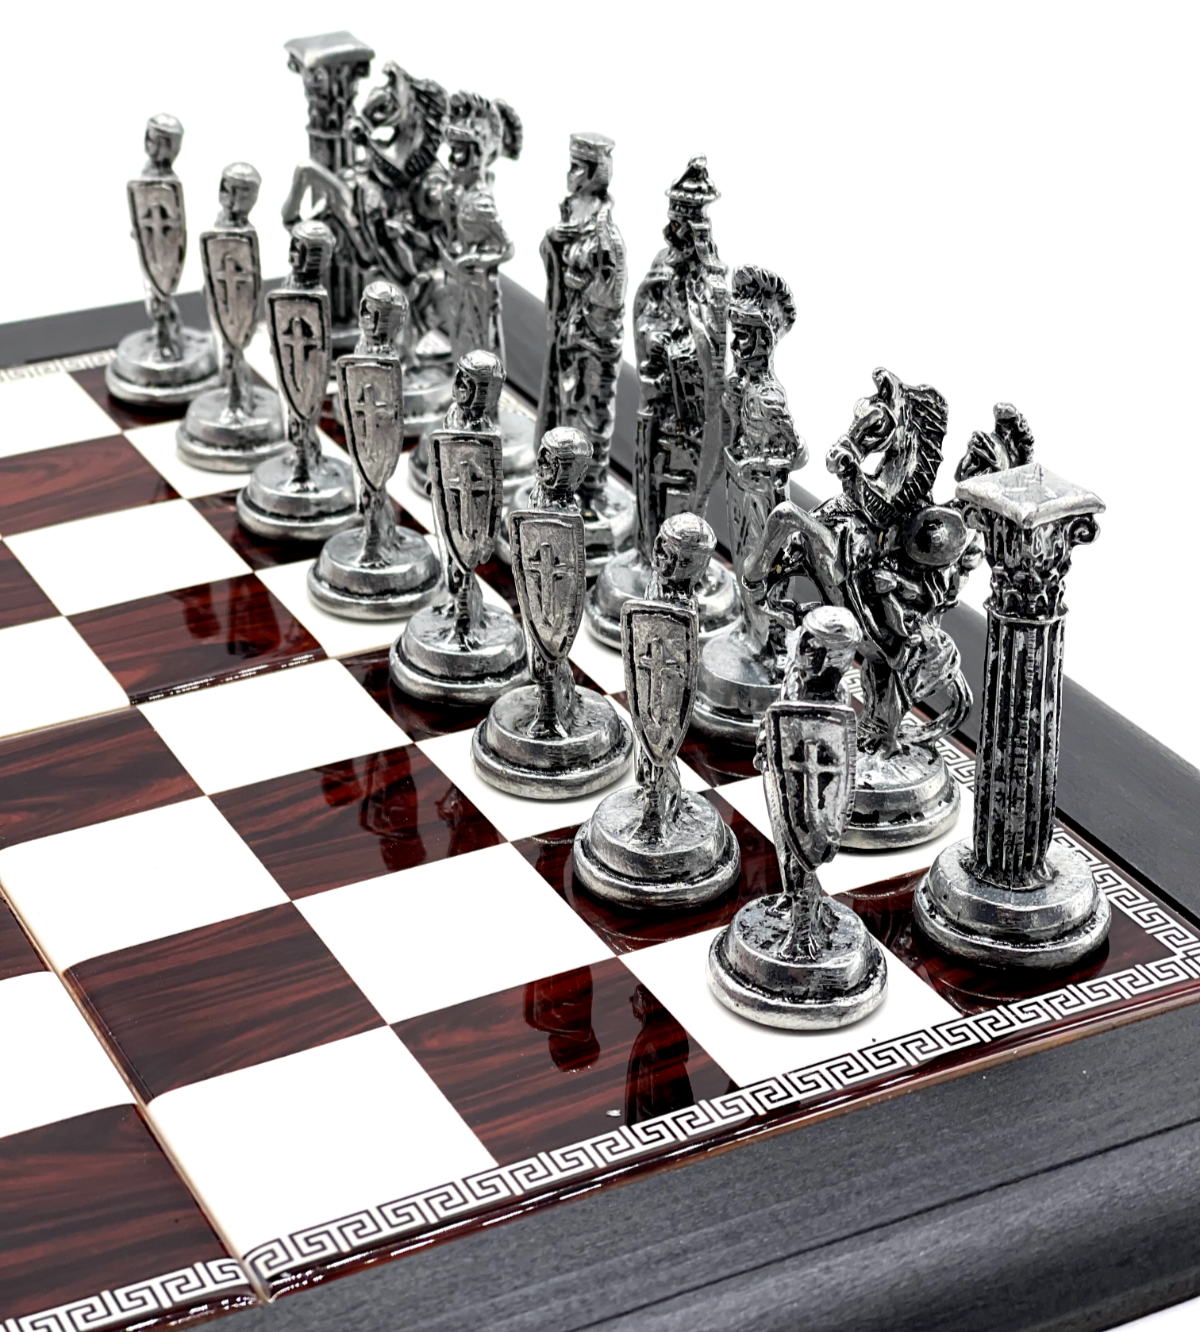 British Metal Chess Pieces With Ceramic Chess Board On Handmade Wood, Chess  Set